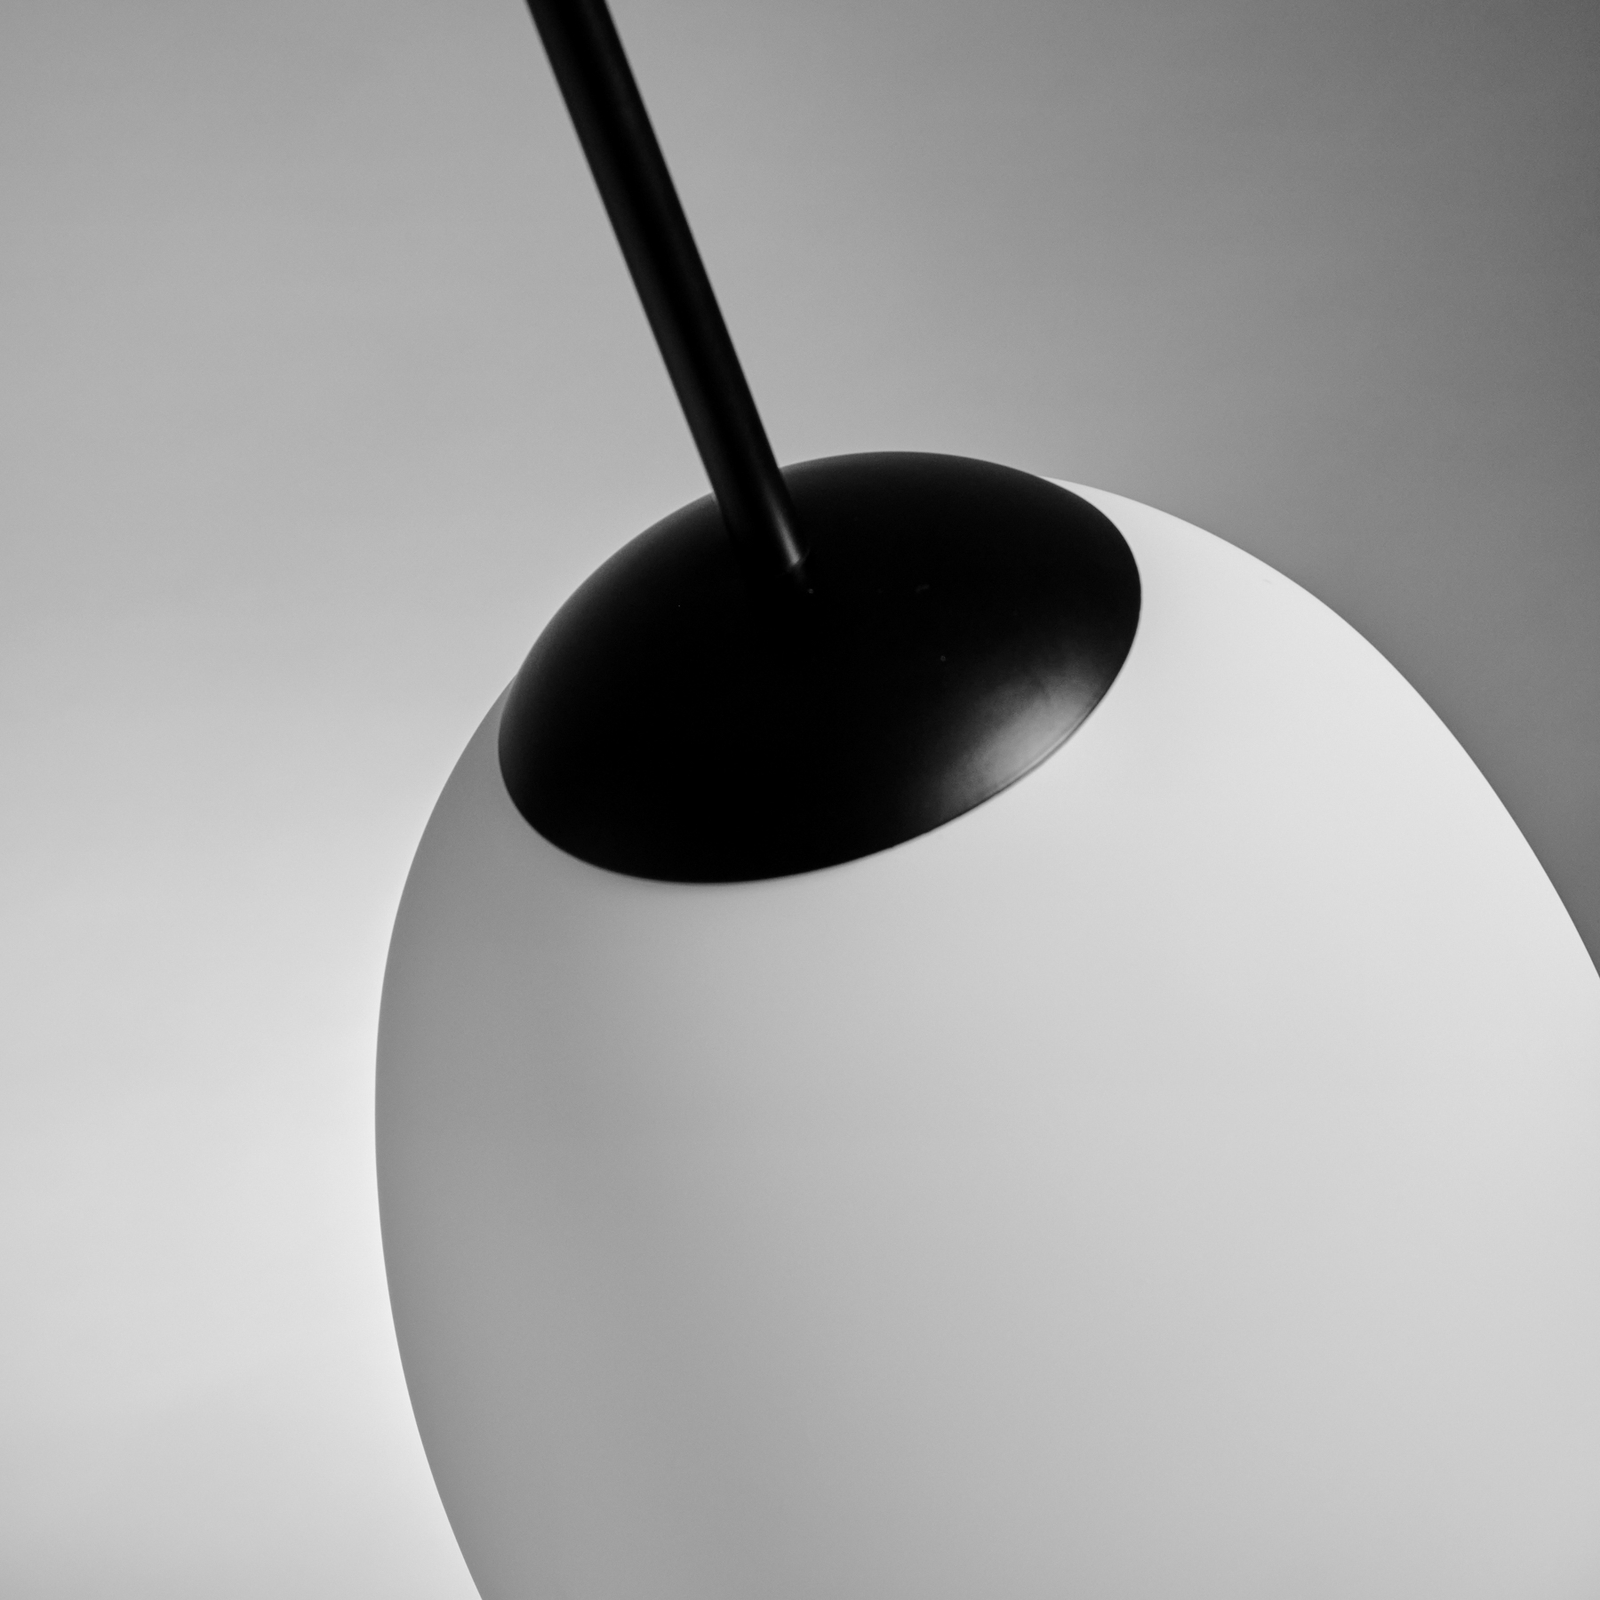 Drop pendant light, frosted glass, black